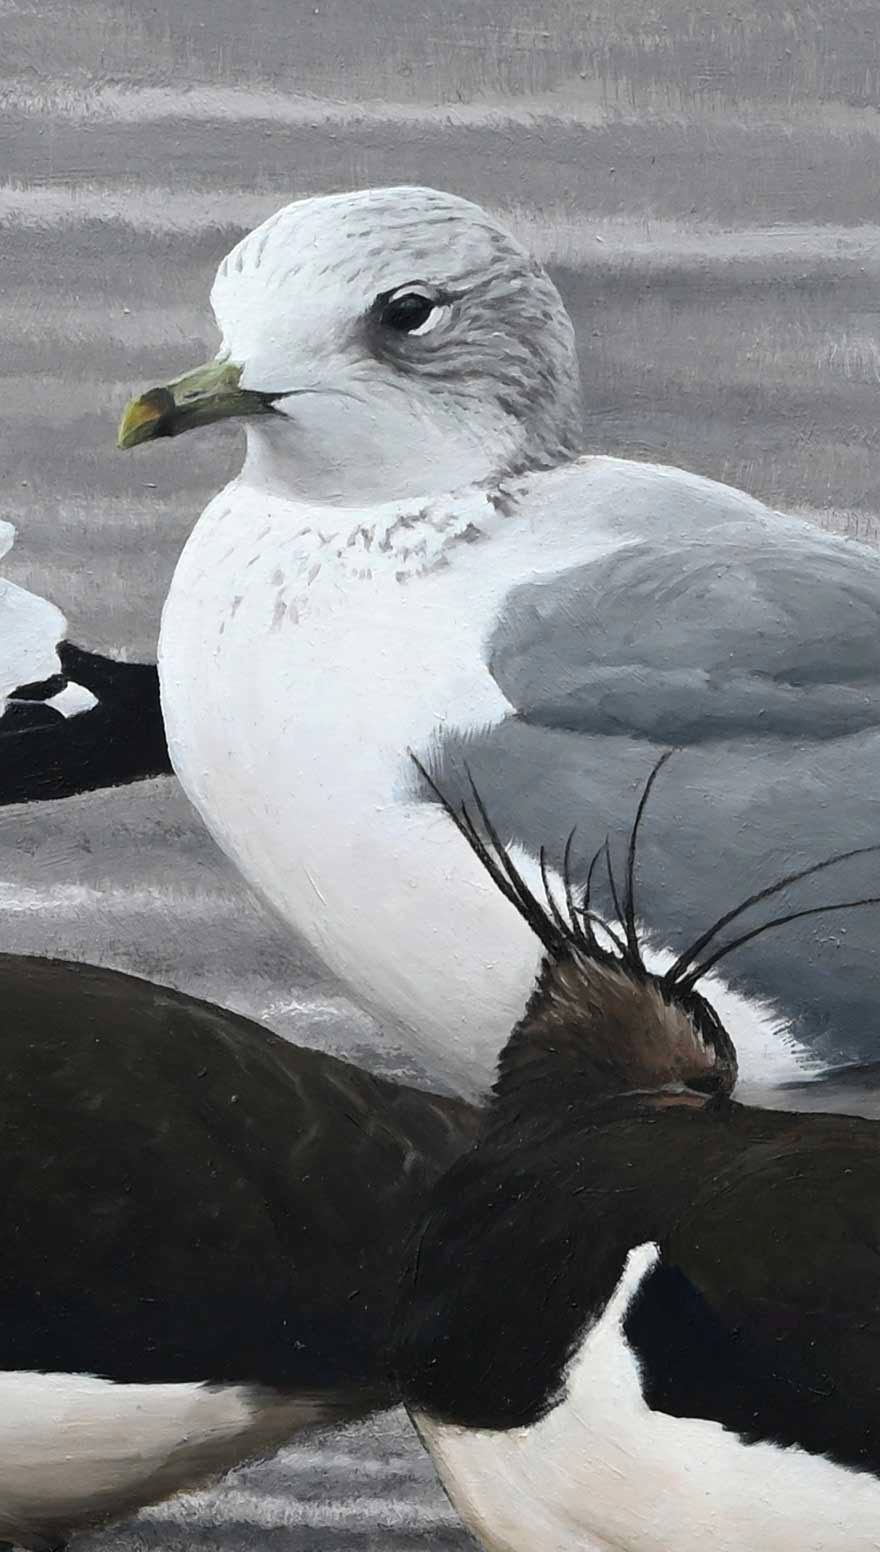 Gulls and Lapwing - An Original Oil Painting By Bird Artist Chris Lodge